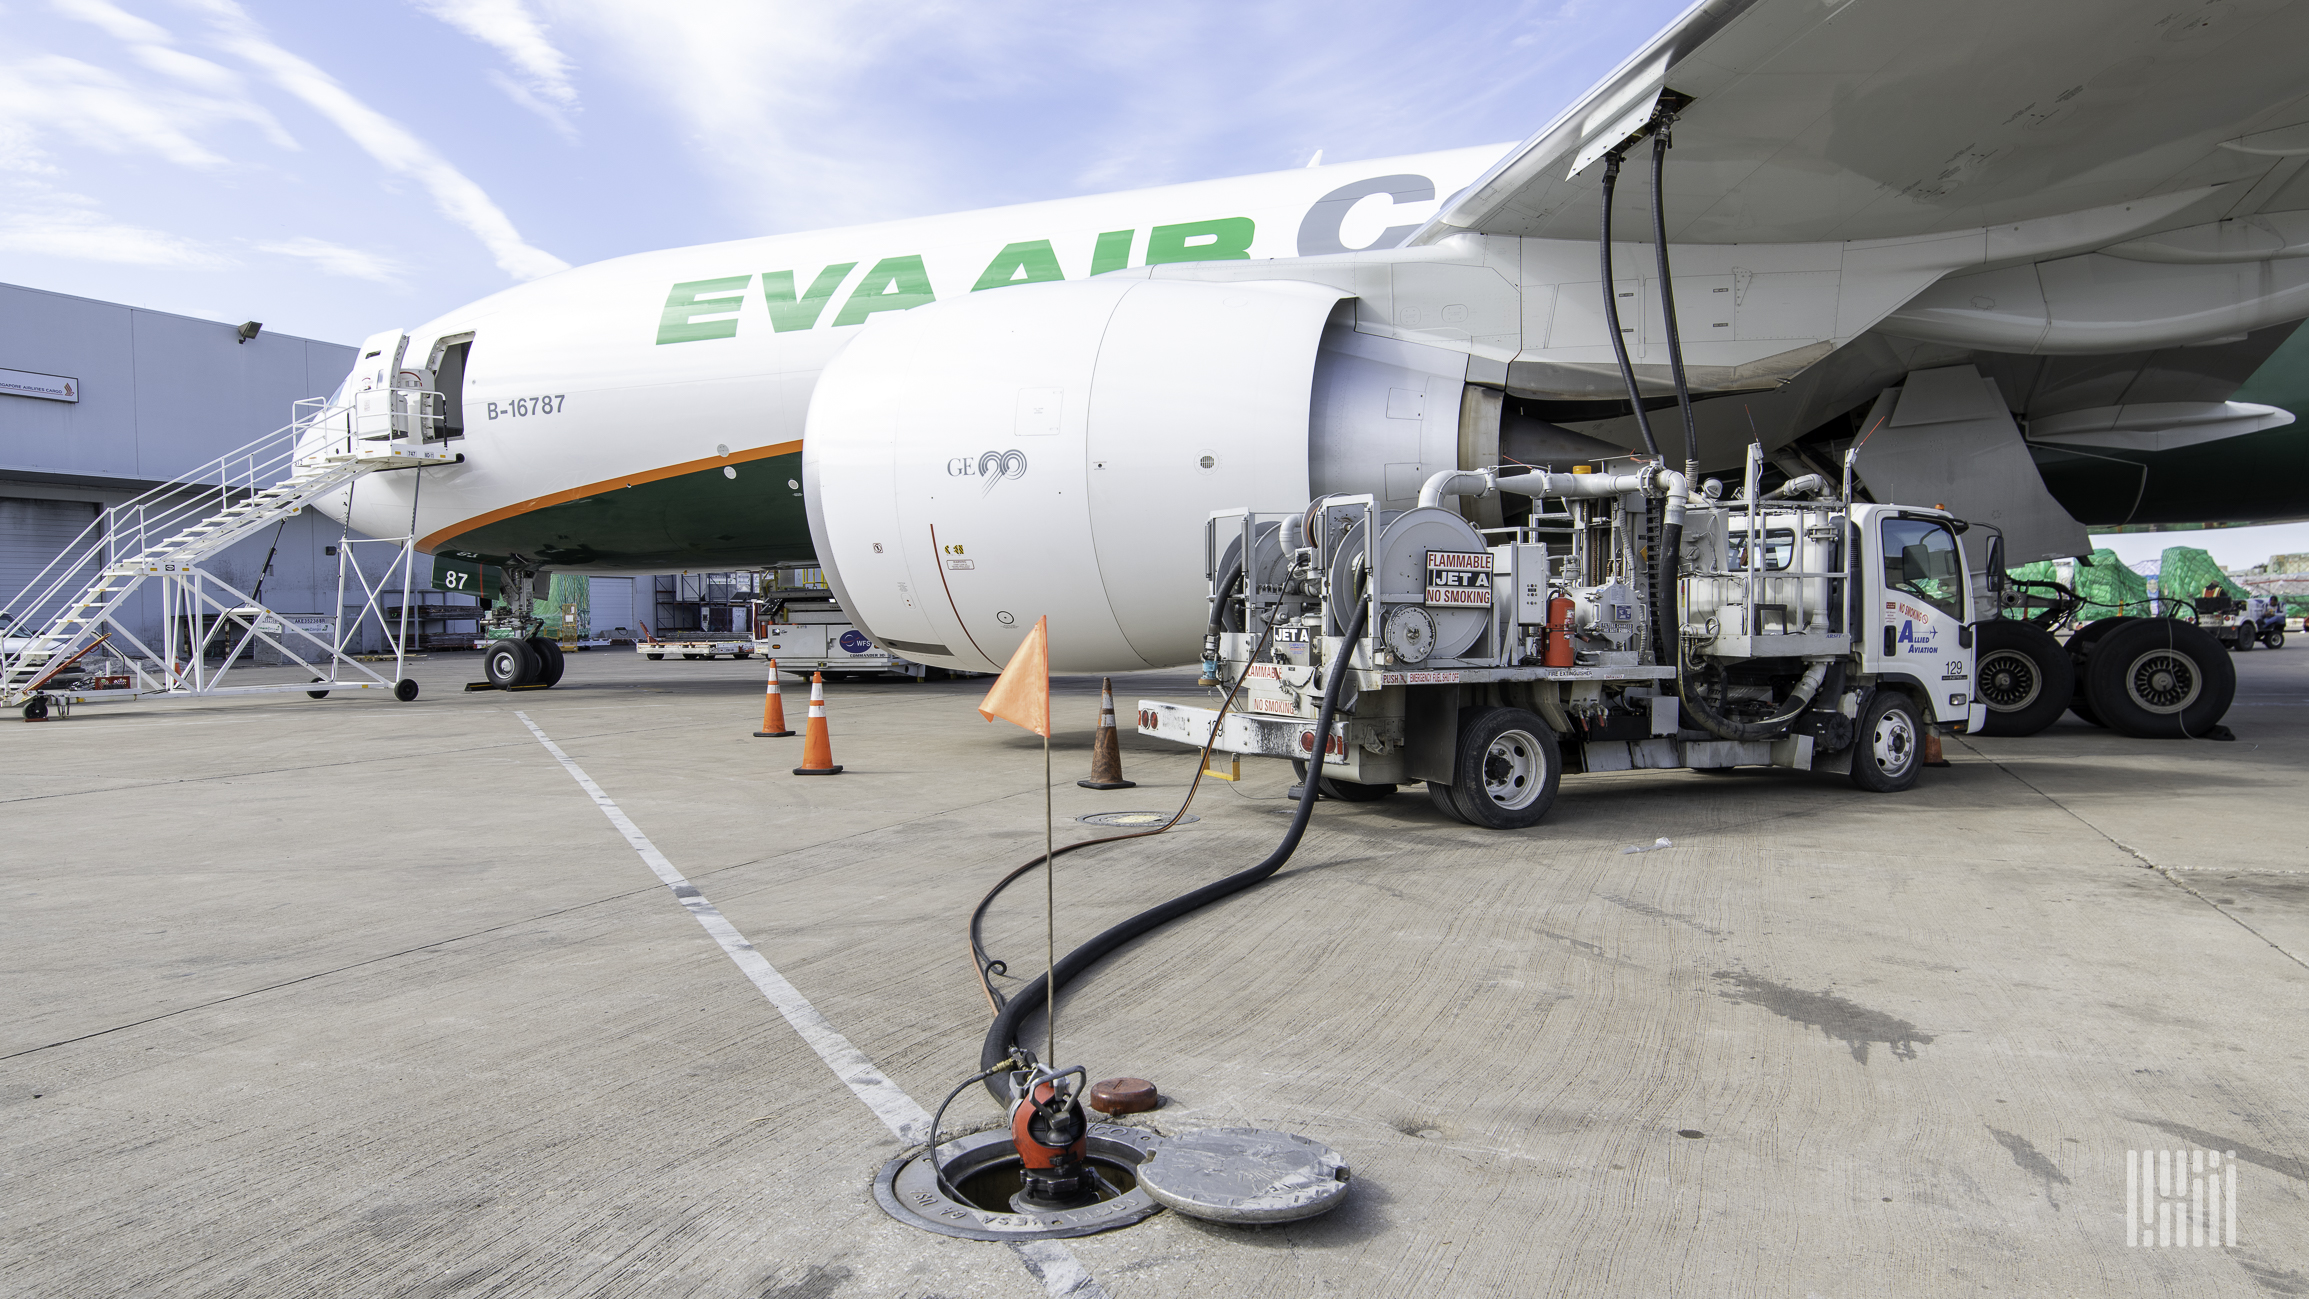 A large cargo jet getting refueled by a truck at the airport.